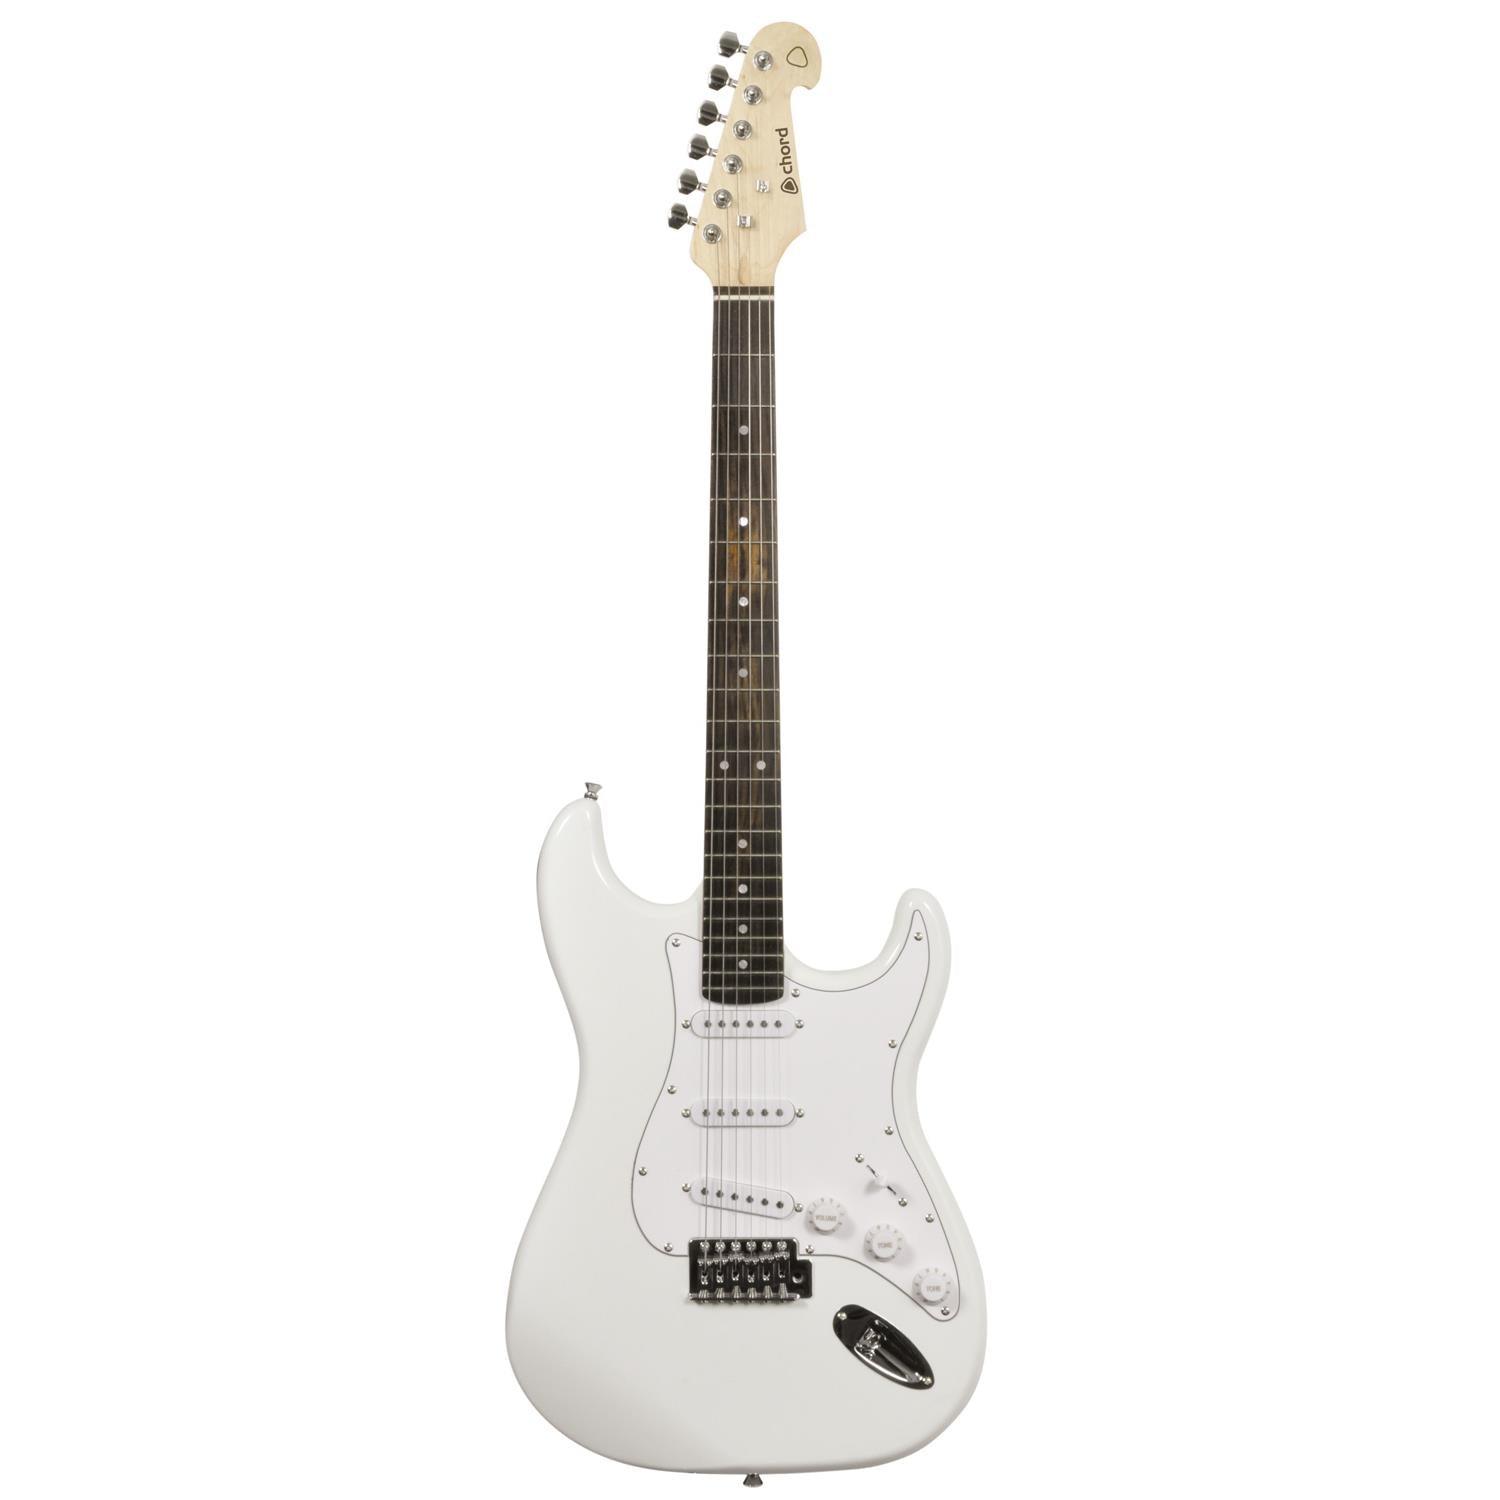 Chord CAL63-ATW Guitar Arctic White - DY Pro Audio